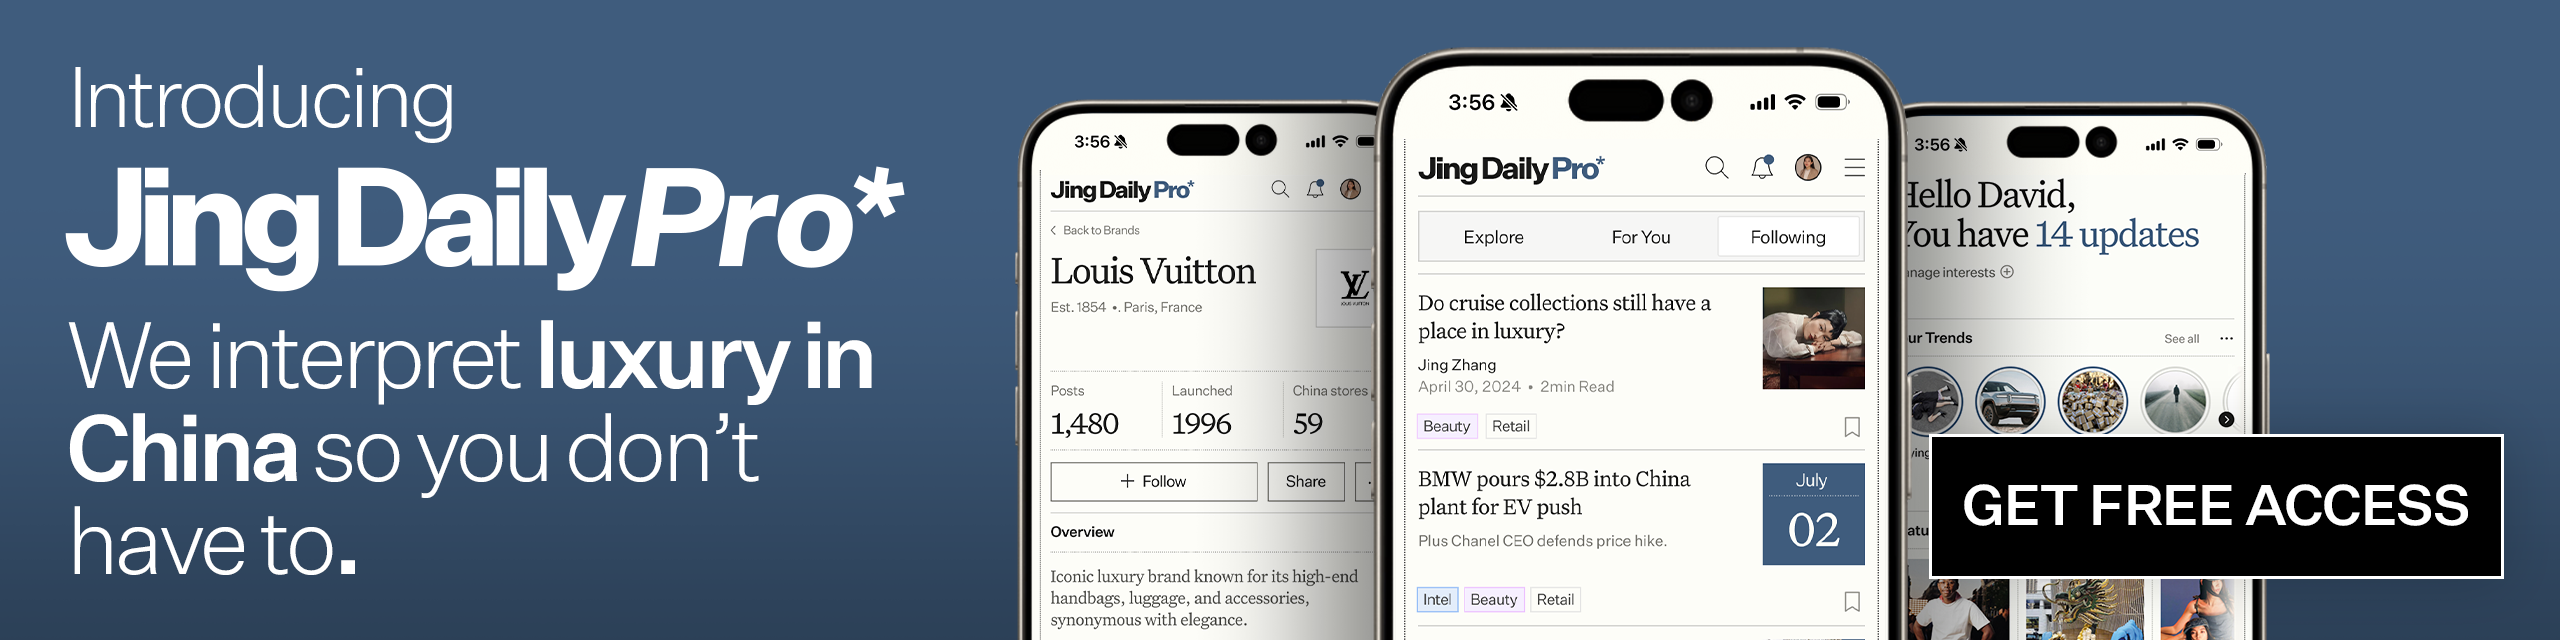 Jing Daily Pro* - Introducing Jing Daily Pro* (v.2)